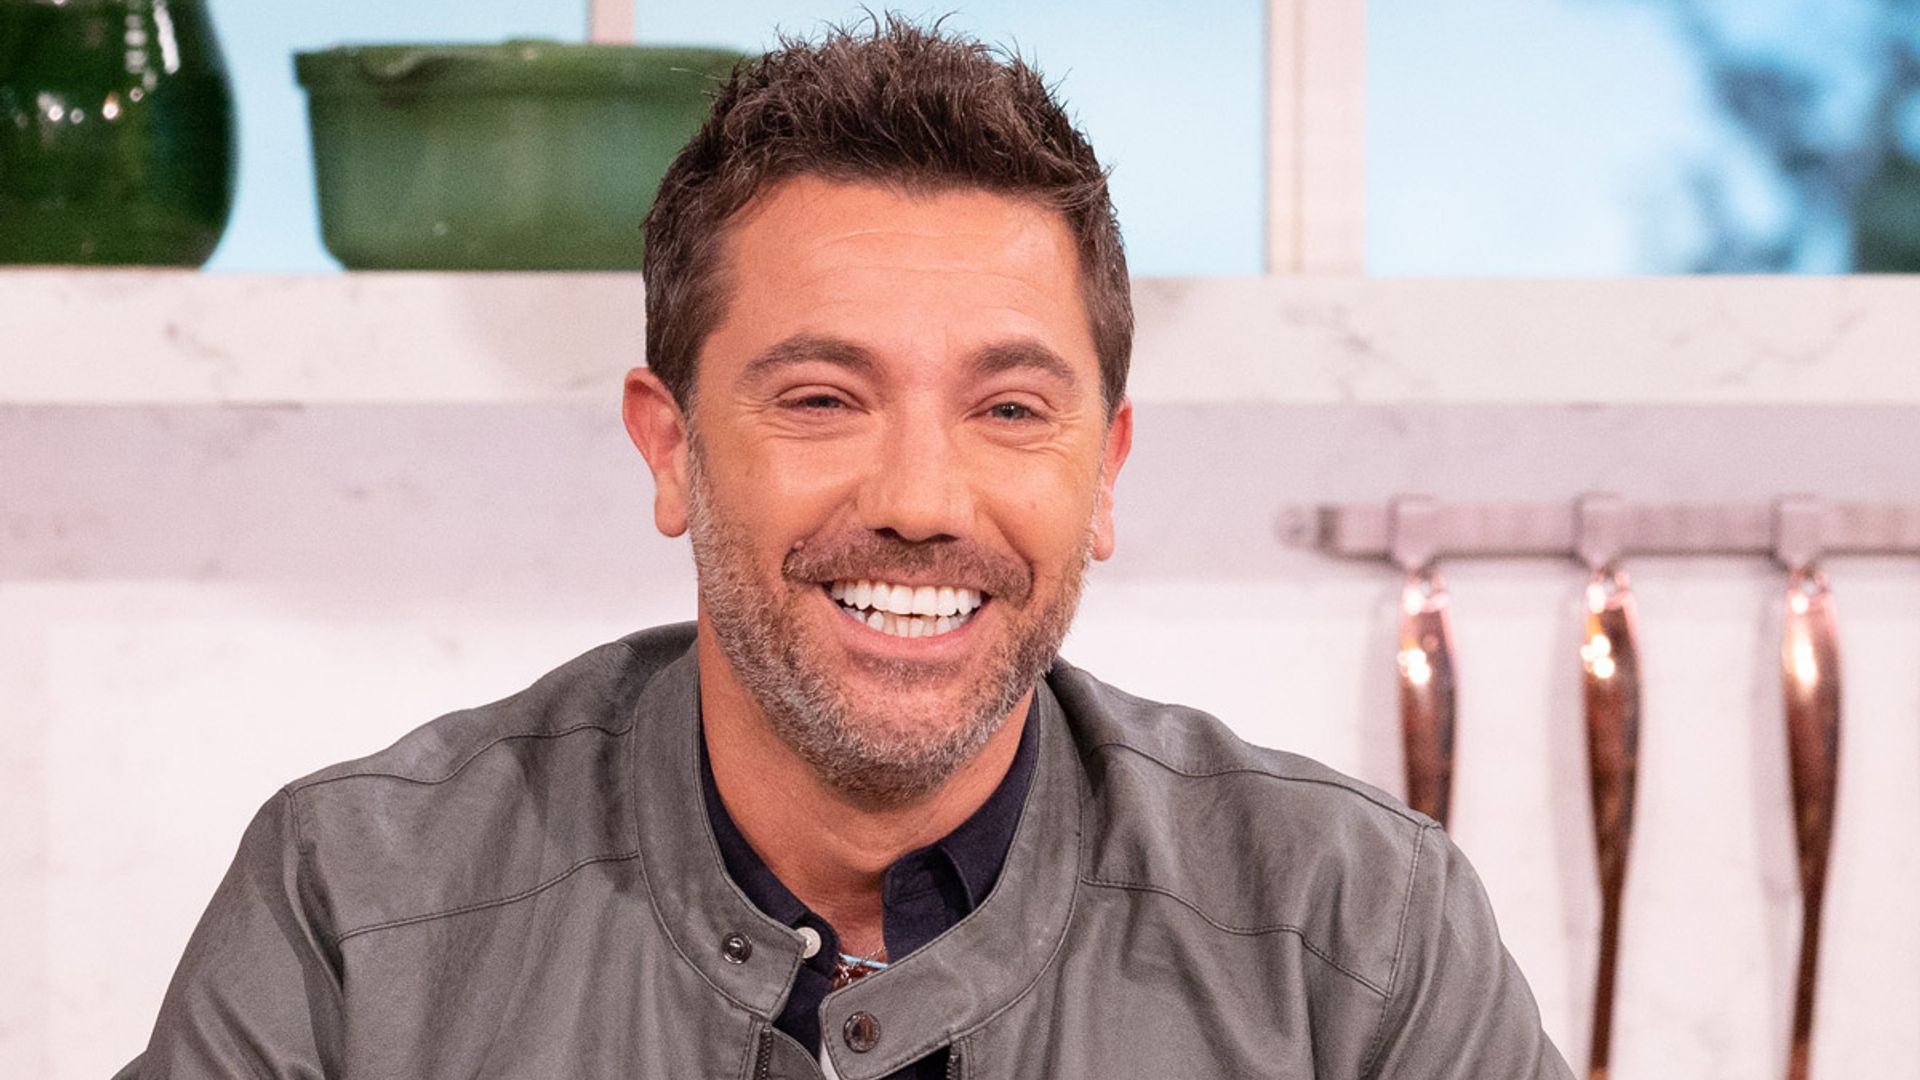 Gino D'Acampo reveals surprise at son Rocco he shares happy family celebration